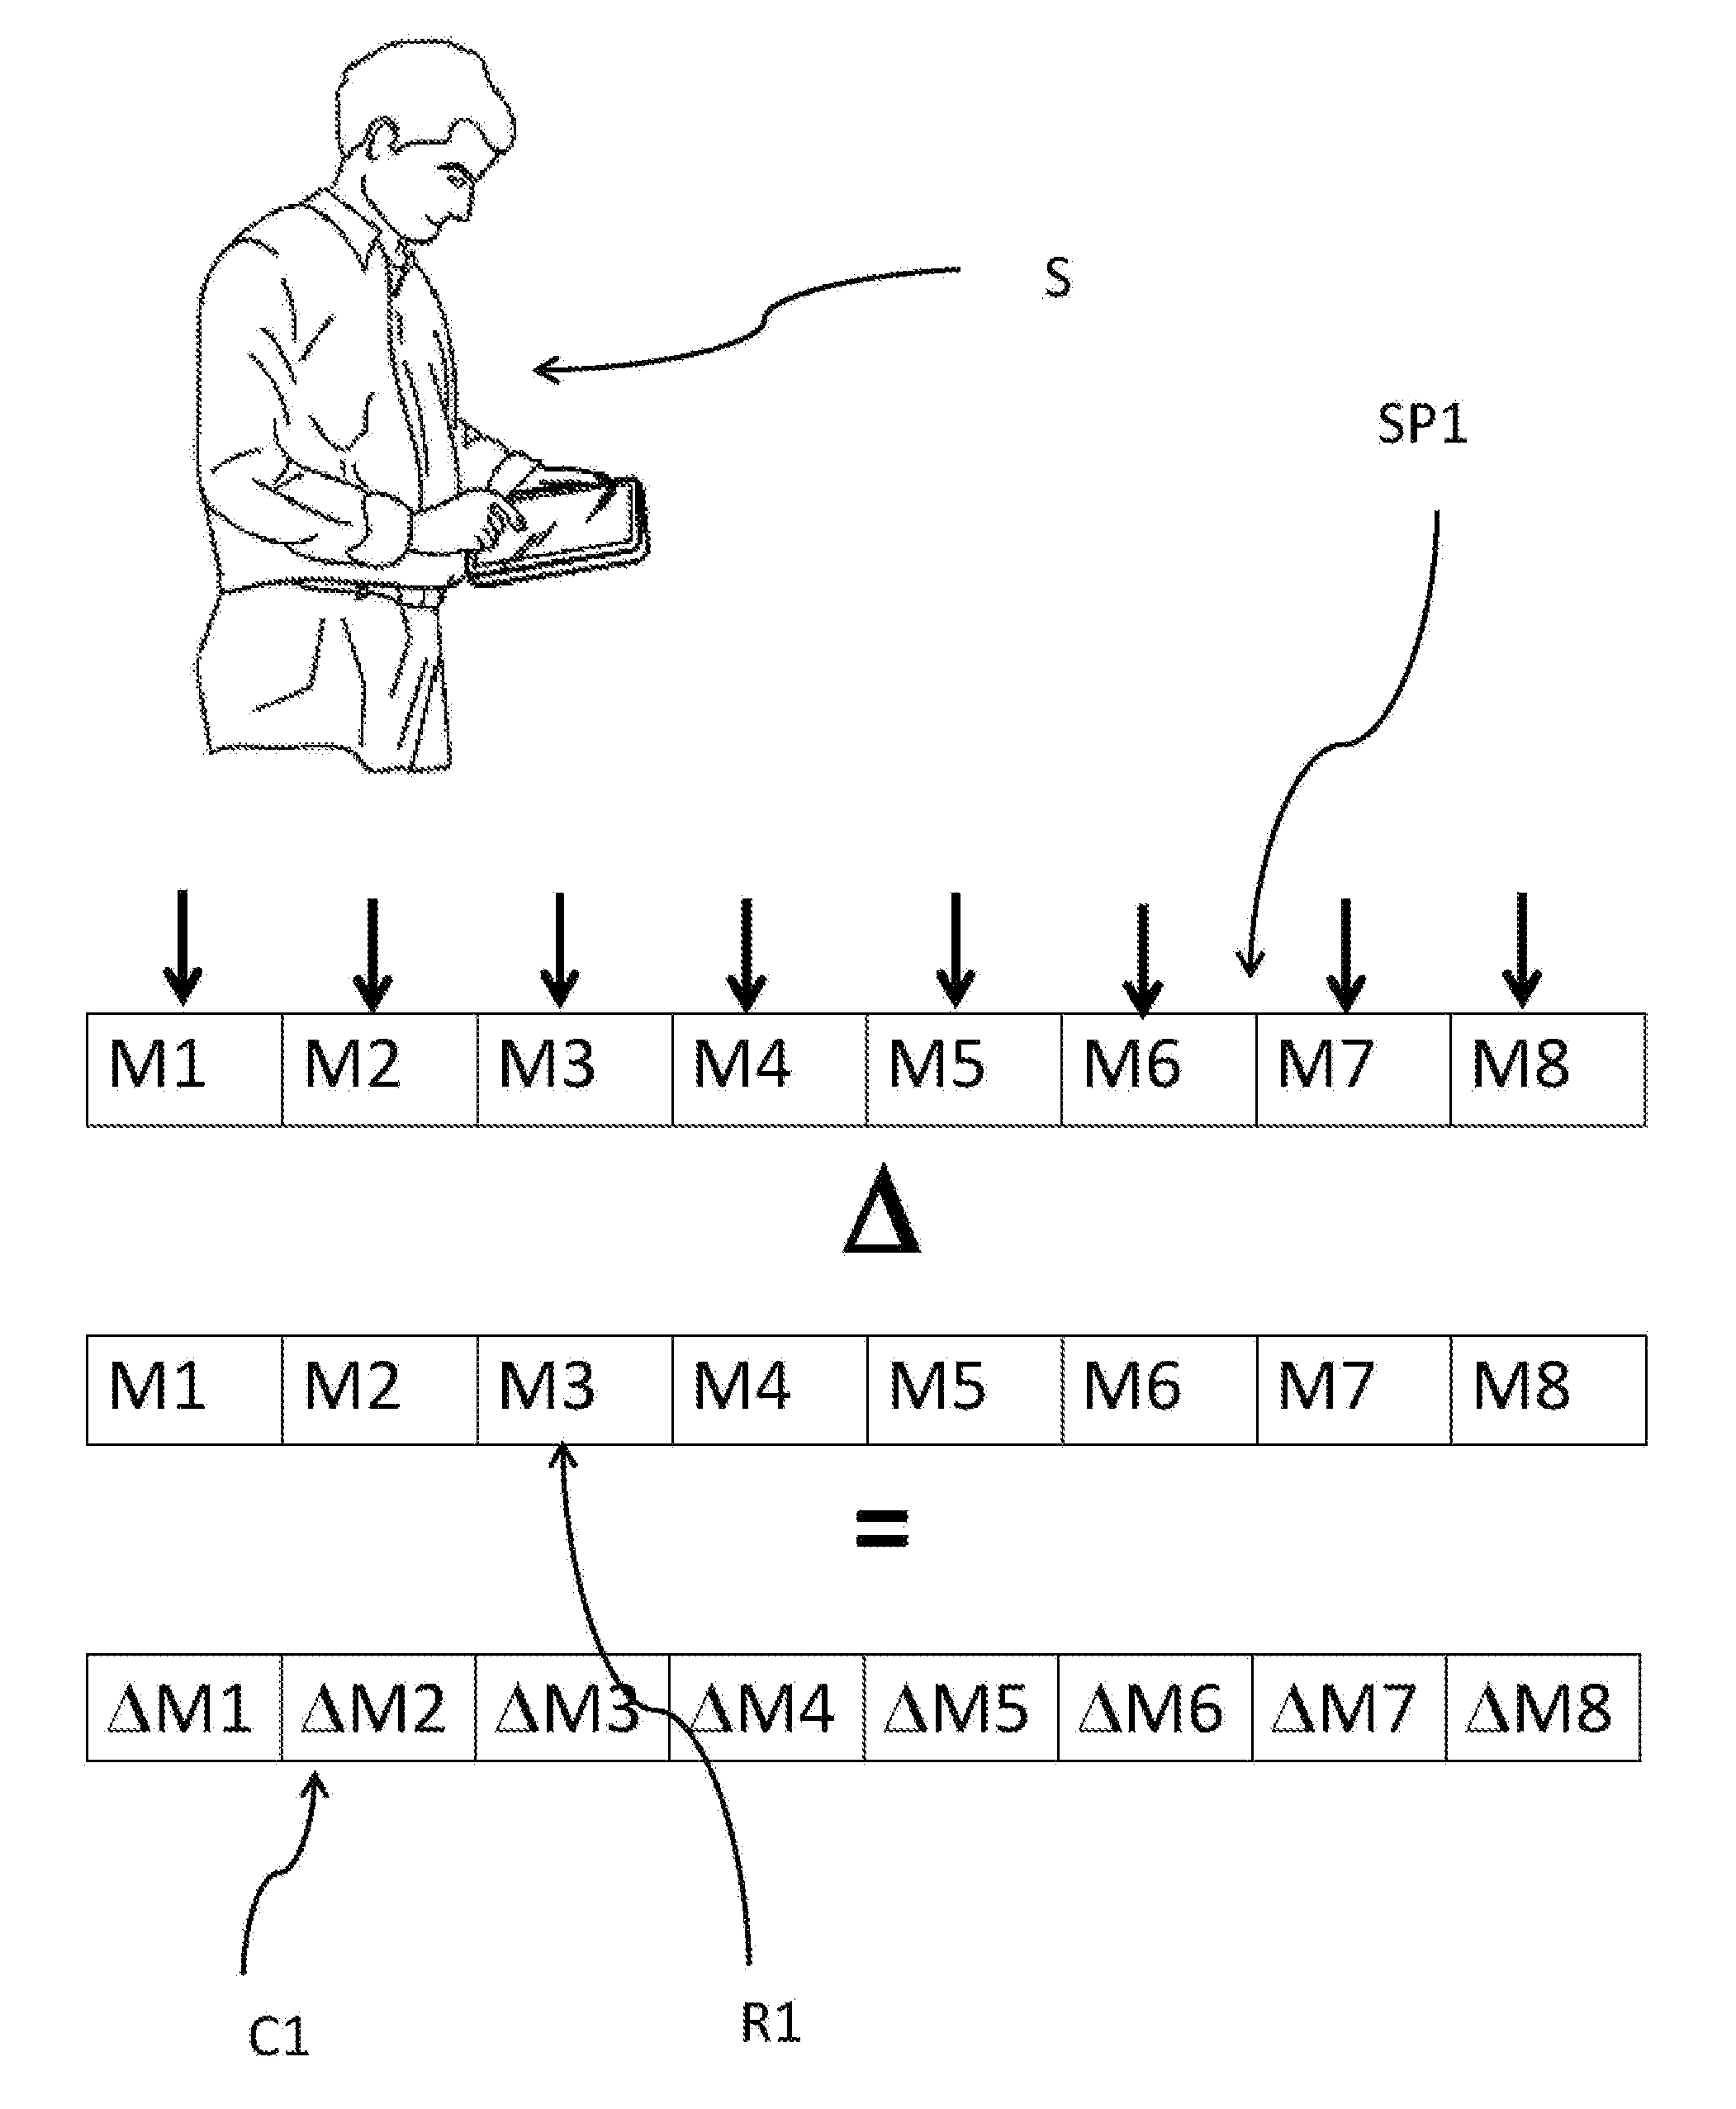 A computer implemented method of determining athletic aptitude